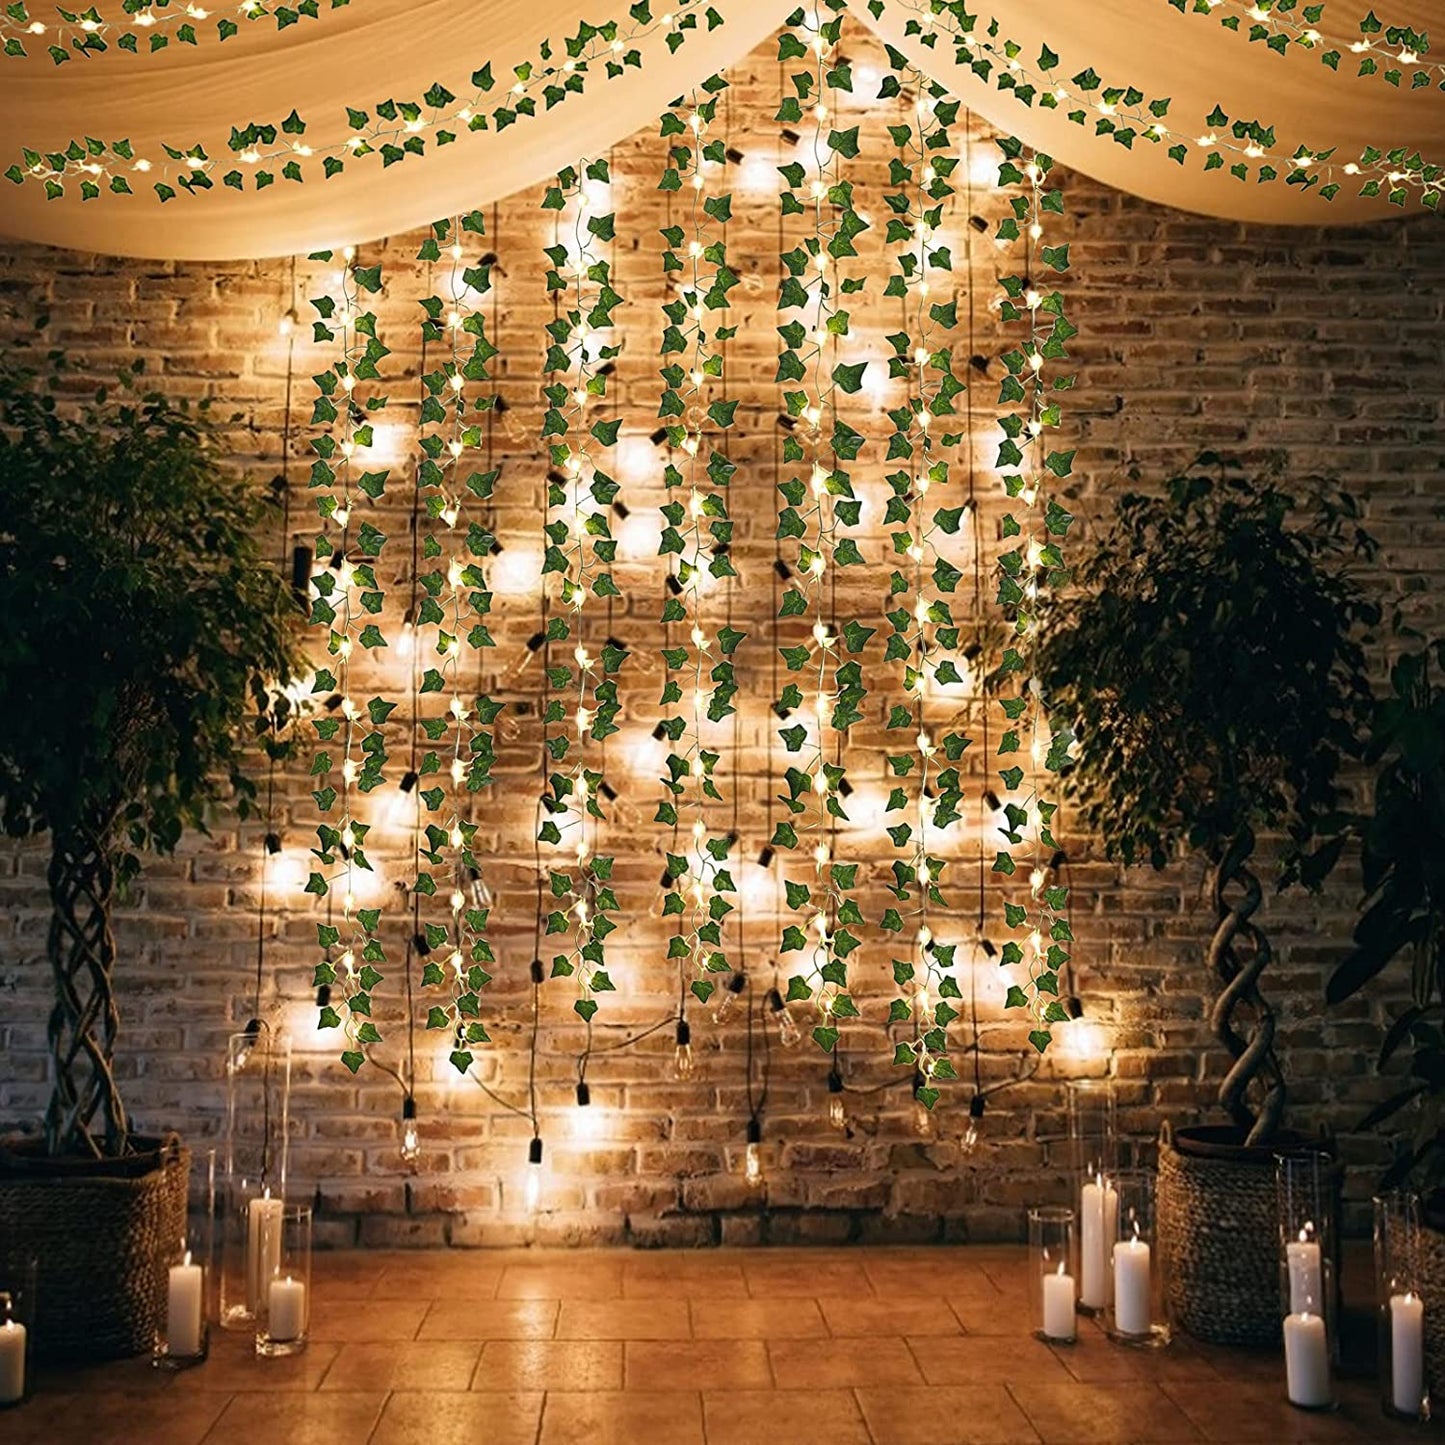 12Pack Vines with LED String Lights, Room Decor Fake Ivy, Wall Decor Artificial Ivy Garland, Garden Decor Fake Vines, Artificial Plants Leaves Aesthetic Garden Accessories(84Ft)